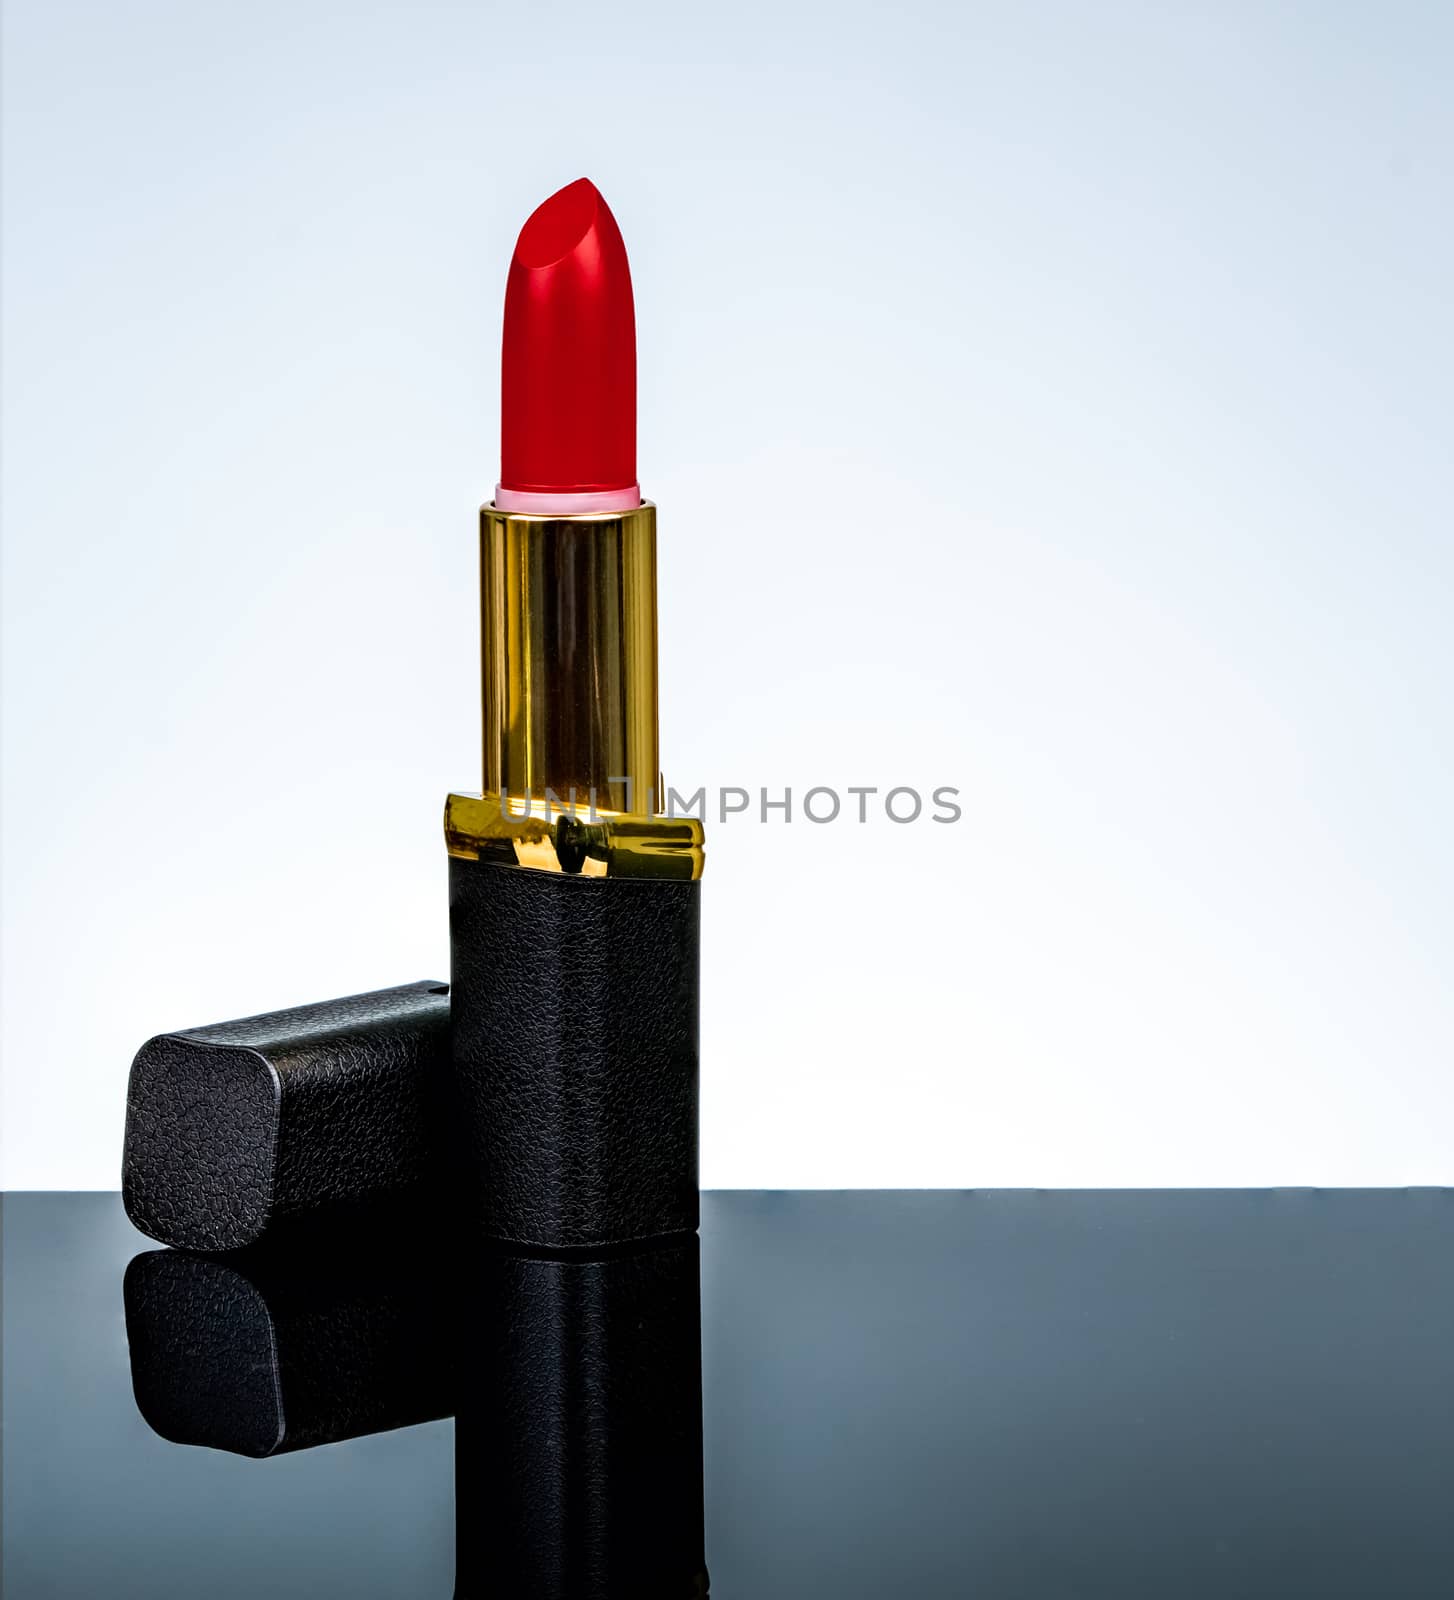 Red matte lipstick in gold and black tube package put on dark table isolated on white background in studio. Red lipstick with open cap. Makeup beauty cosmetic for confident fashion women. 